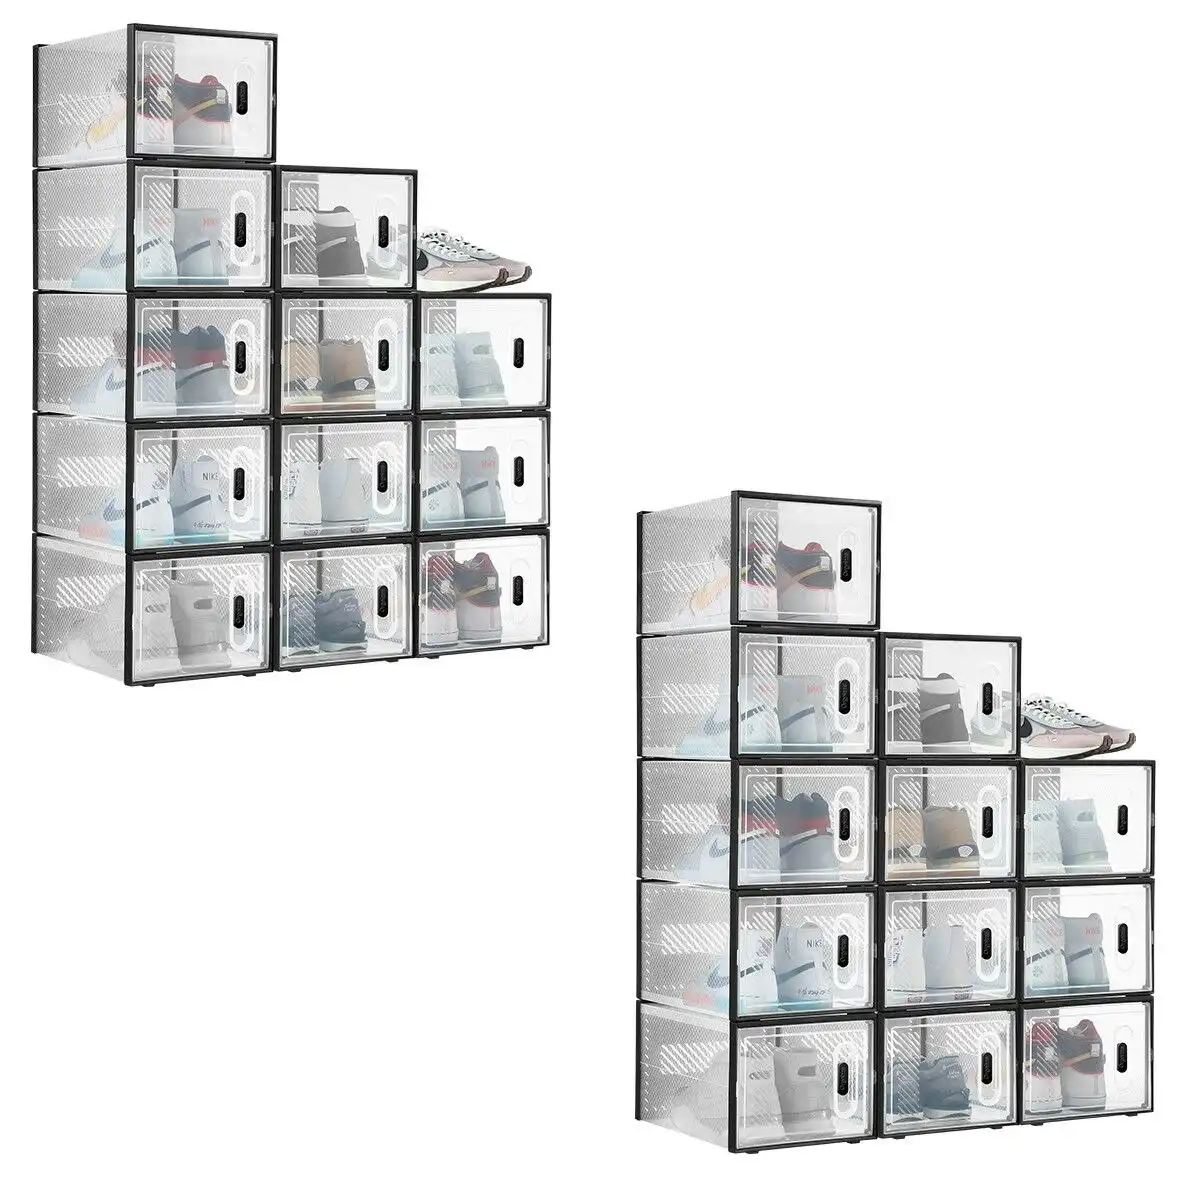 Ausway 24PCS Shoe Box Sneaker Storage Display Case Clear Plastic Boxes Organiser Stackable Extra Large x2